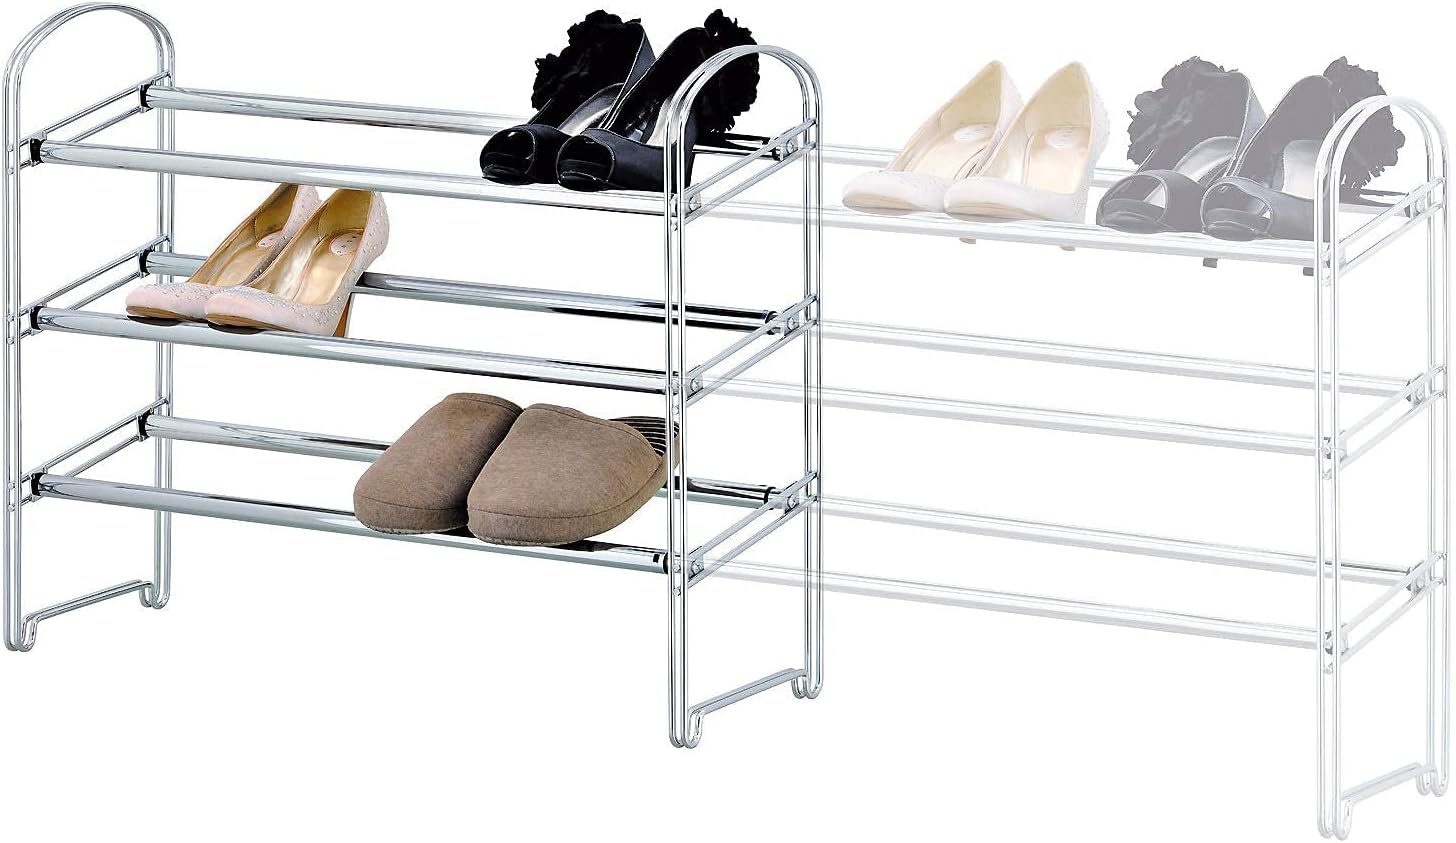 Tatkraft Maestro Heavy Duty 3 Tier Shoe Rack, Expandable Entryway Shoe Organizer, Easy to Assemble, Chrome Plated Steel 3 Tiers